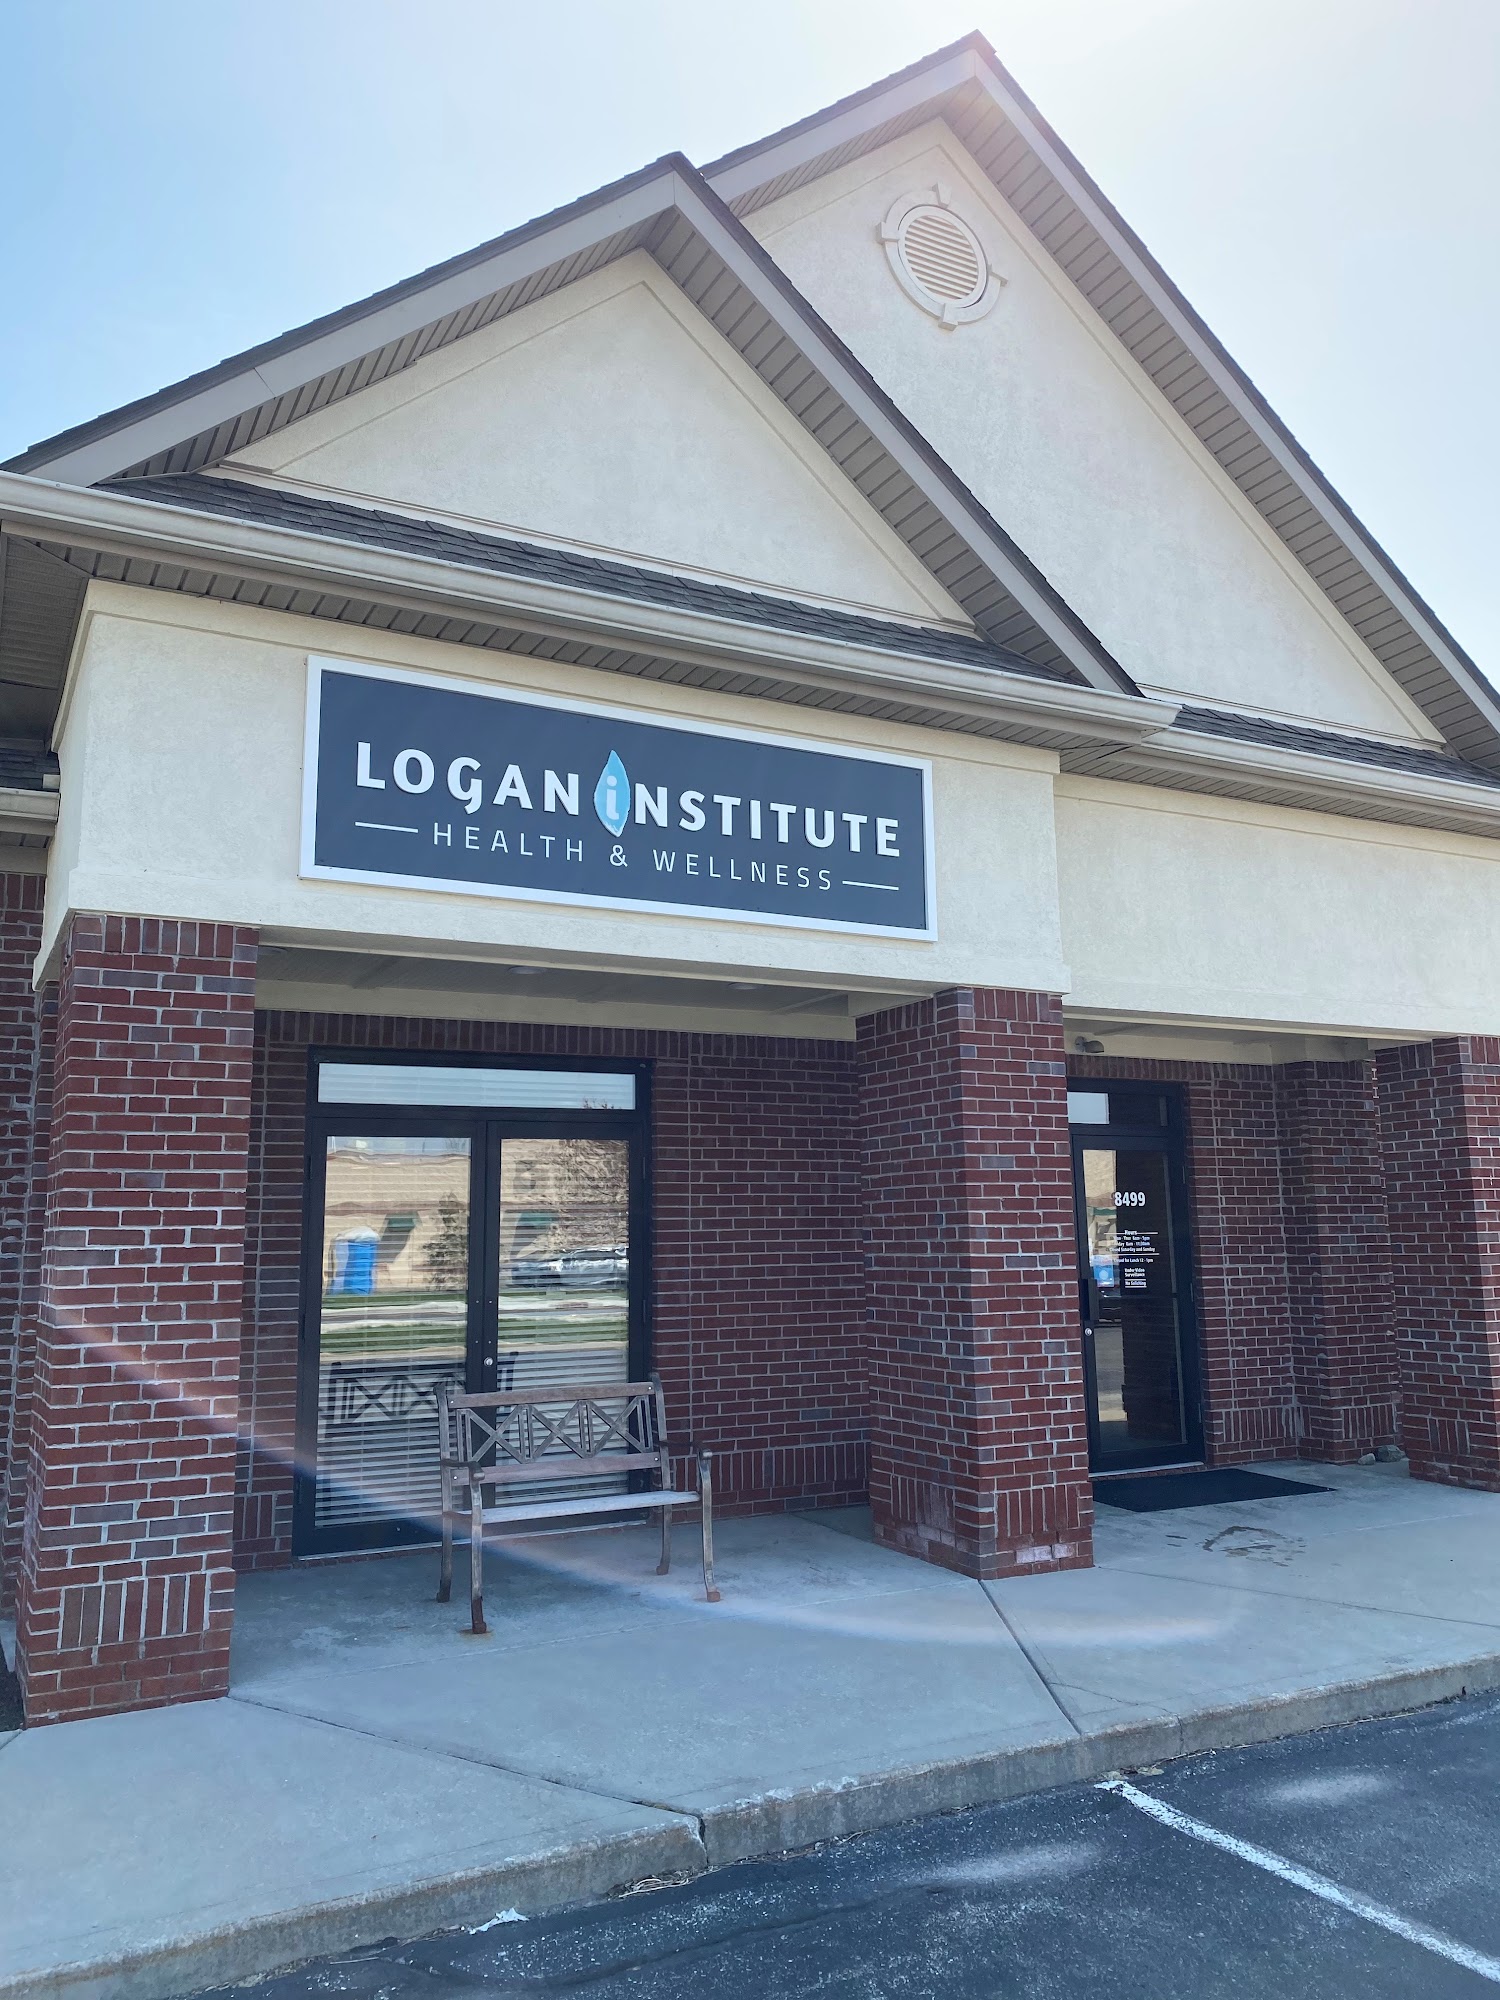 The Logan Institute For Health & Wellness